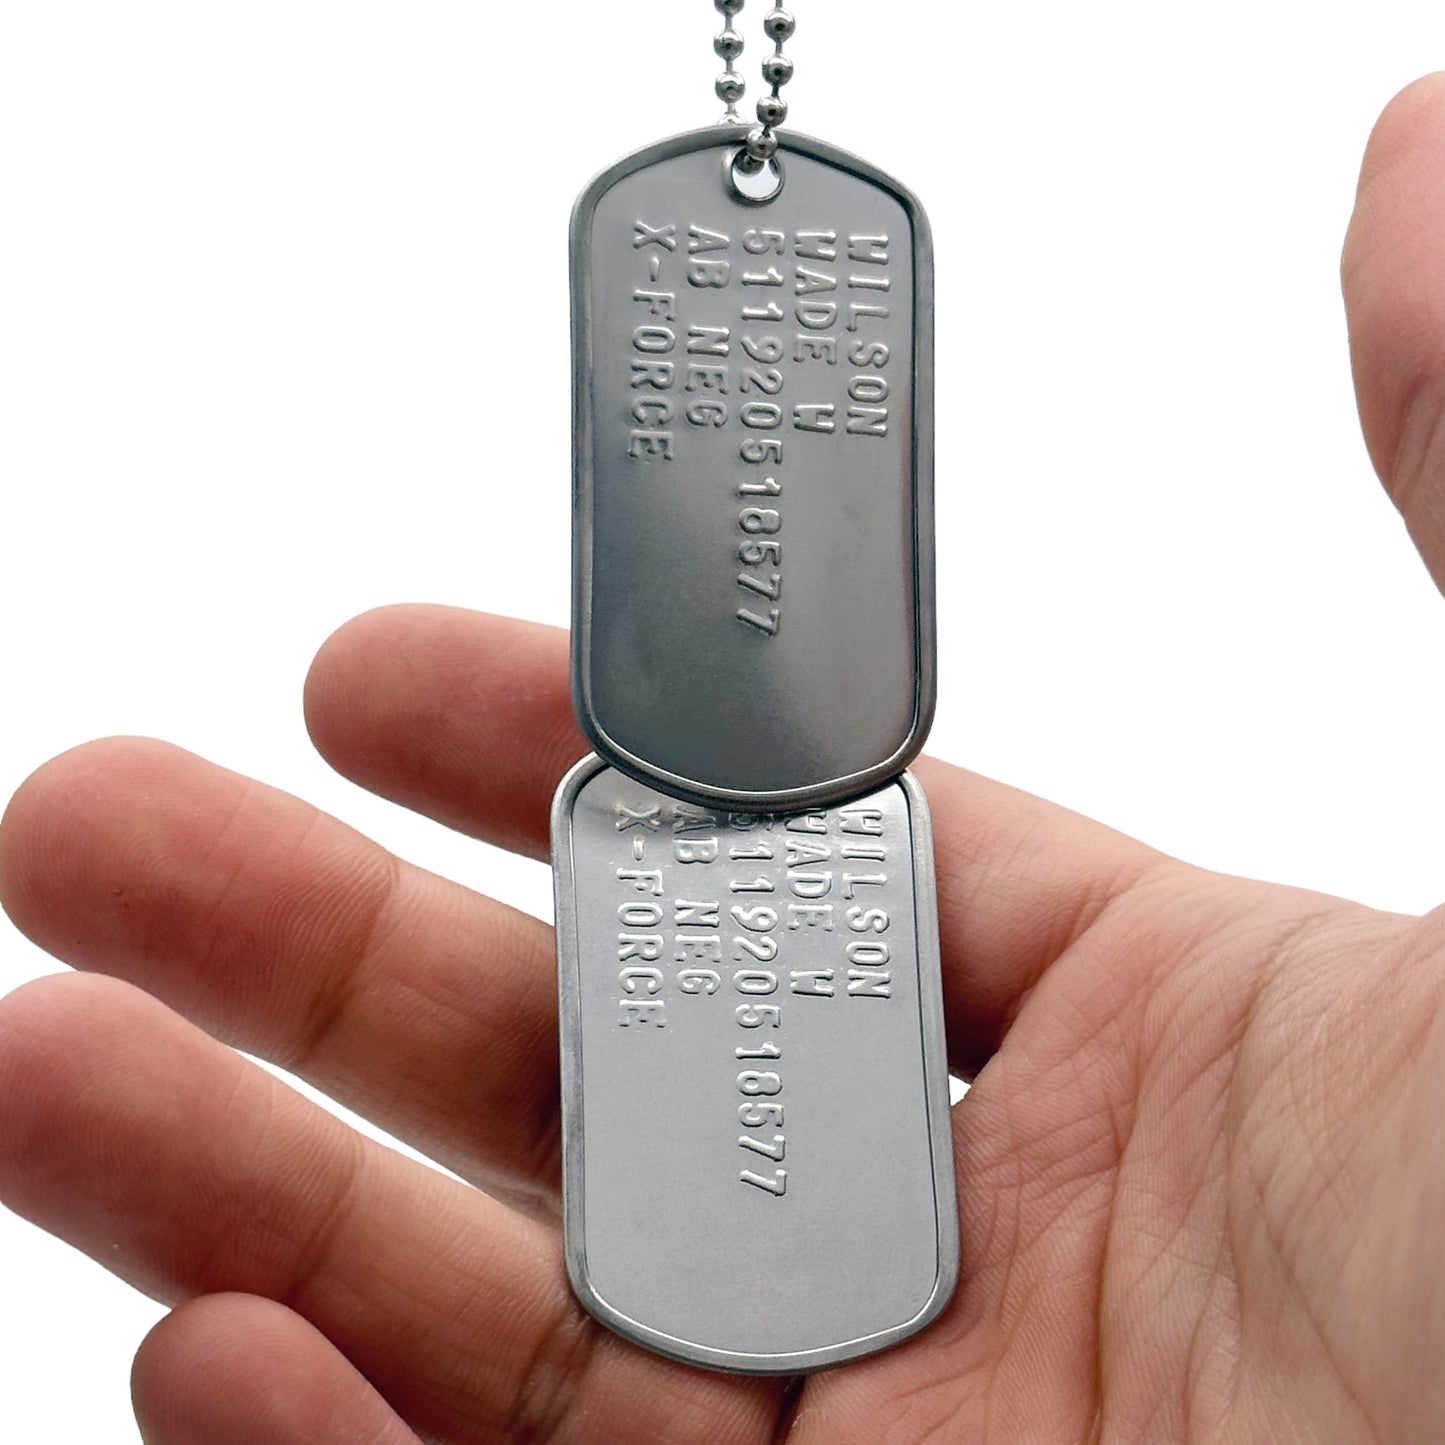 'WADE WILSON' Dog Tags - Costume Cosplay Prop Replica Military - Stainless Steel Chains Included - TheDogTagCo